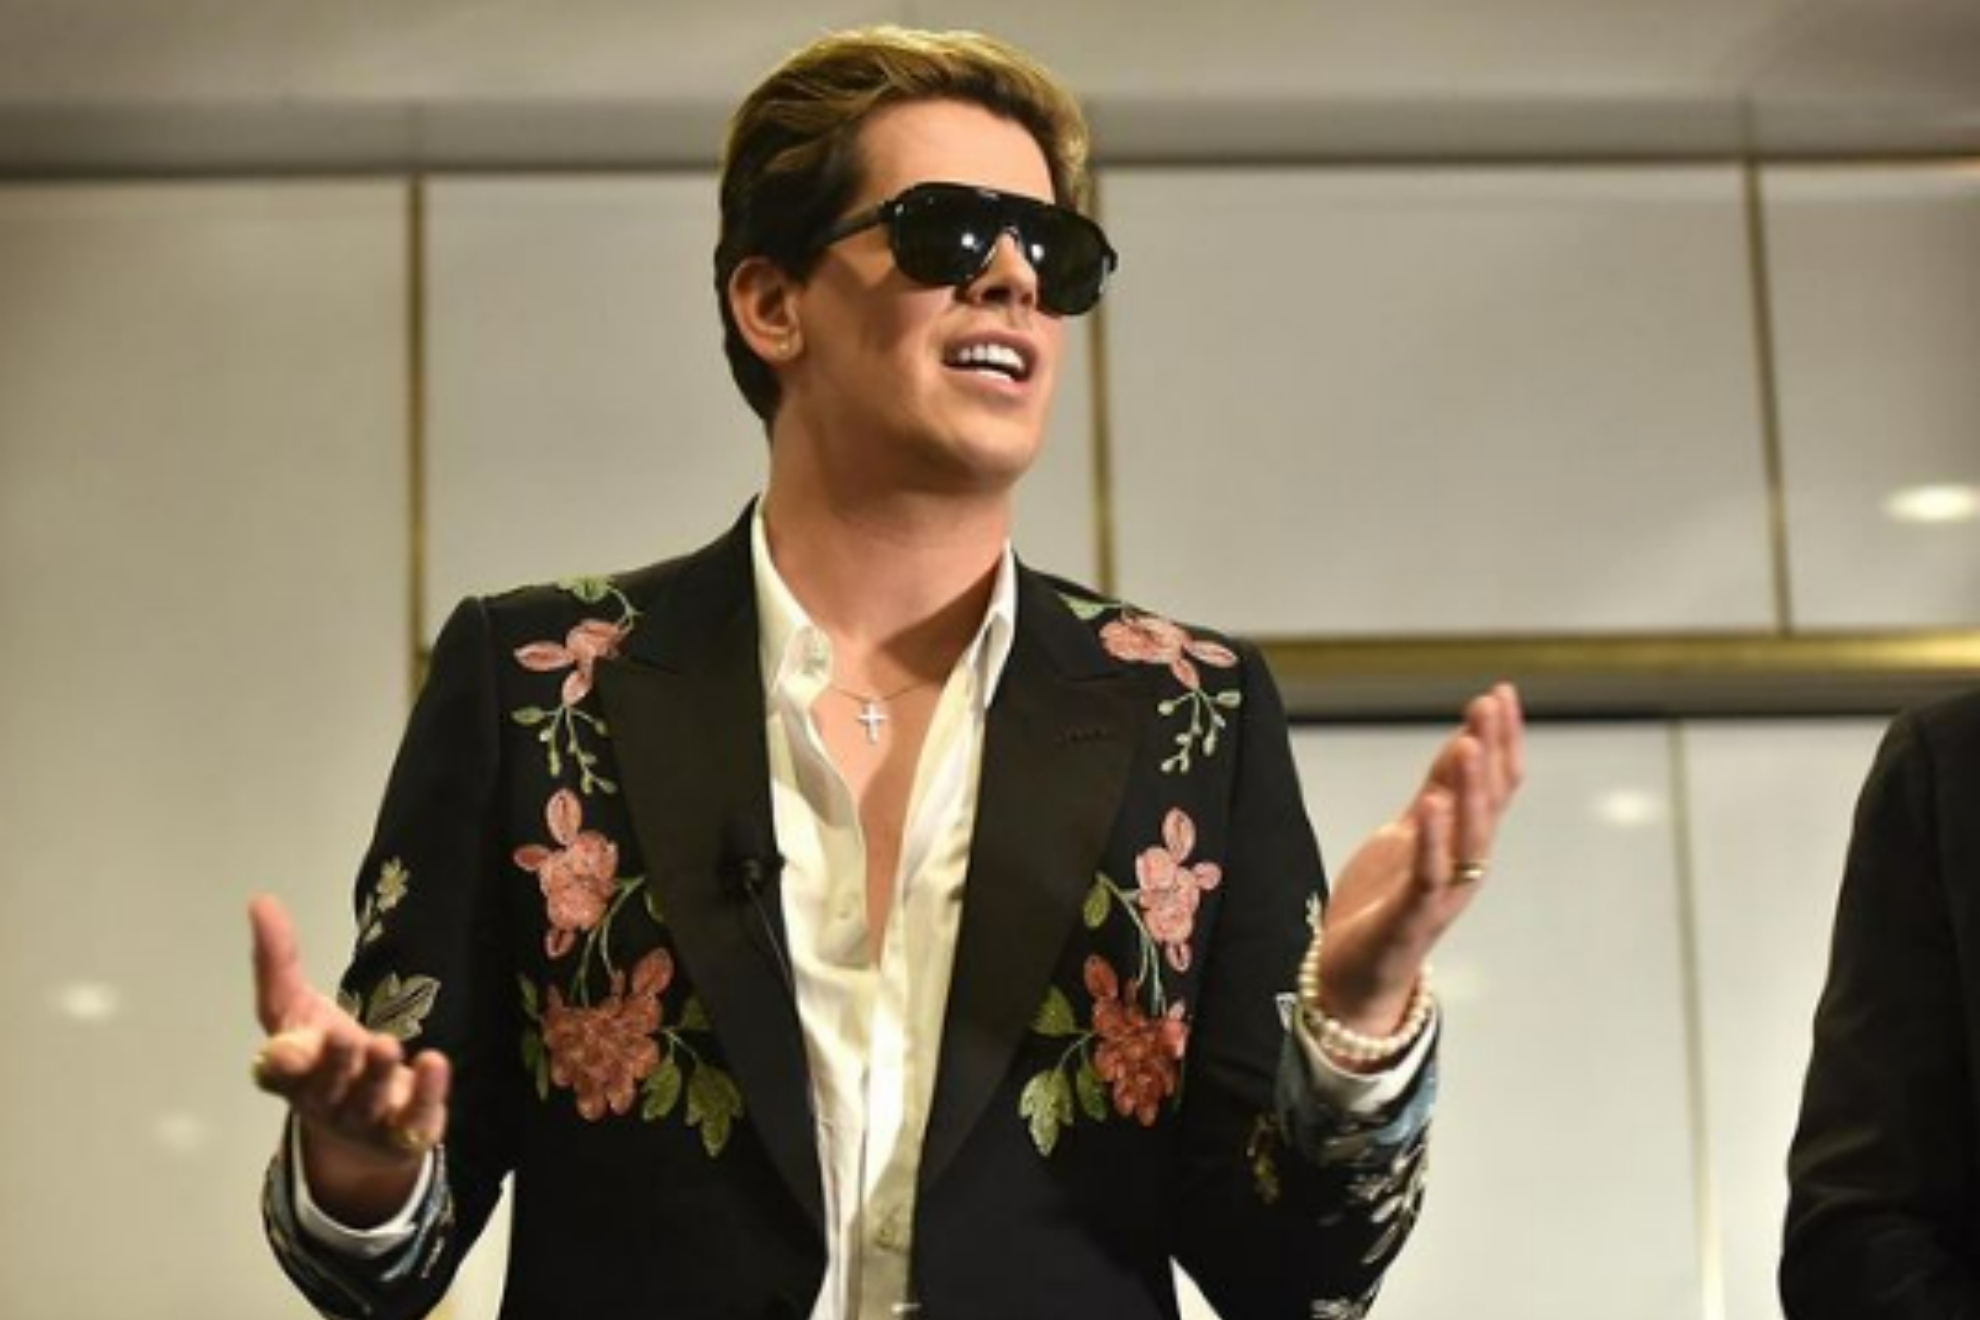 Kanye West drops alt-right poster boy Milo Yiannopoulos from his so-called presidential campaign